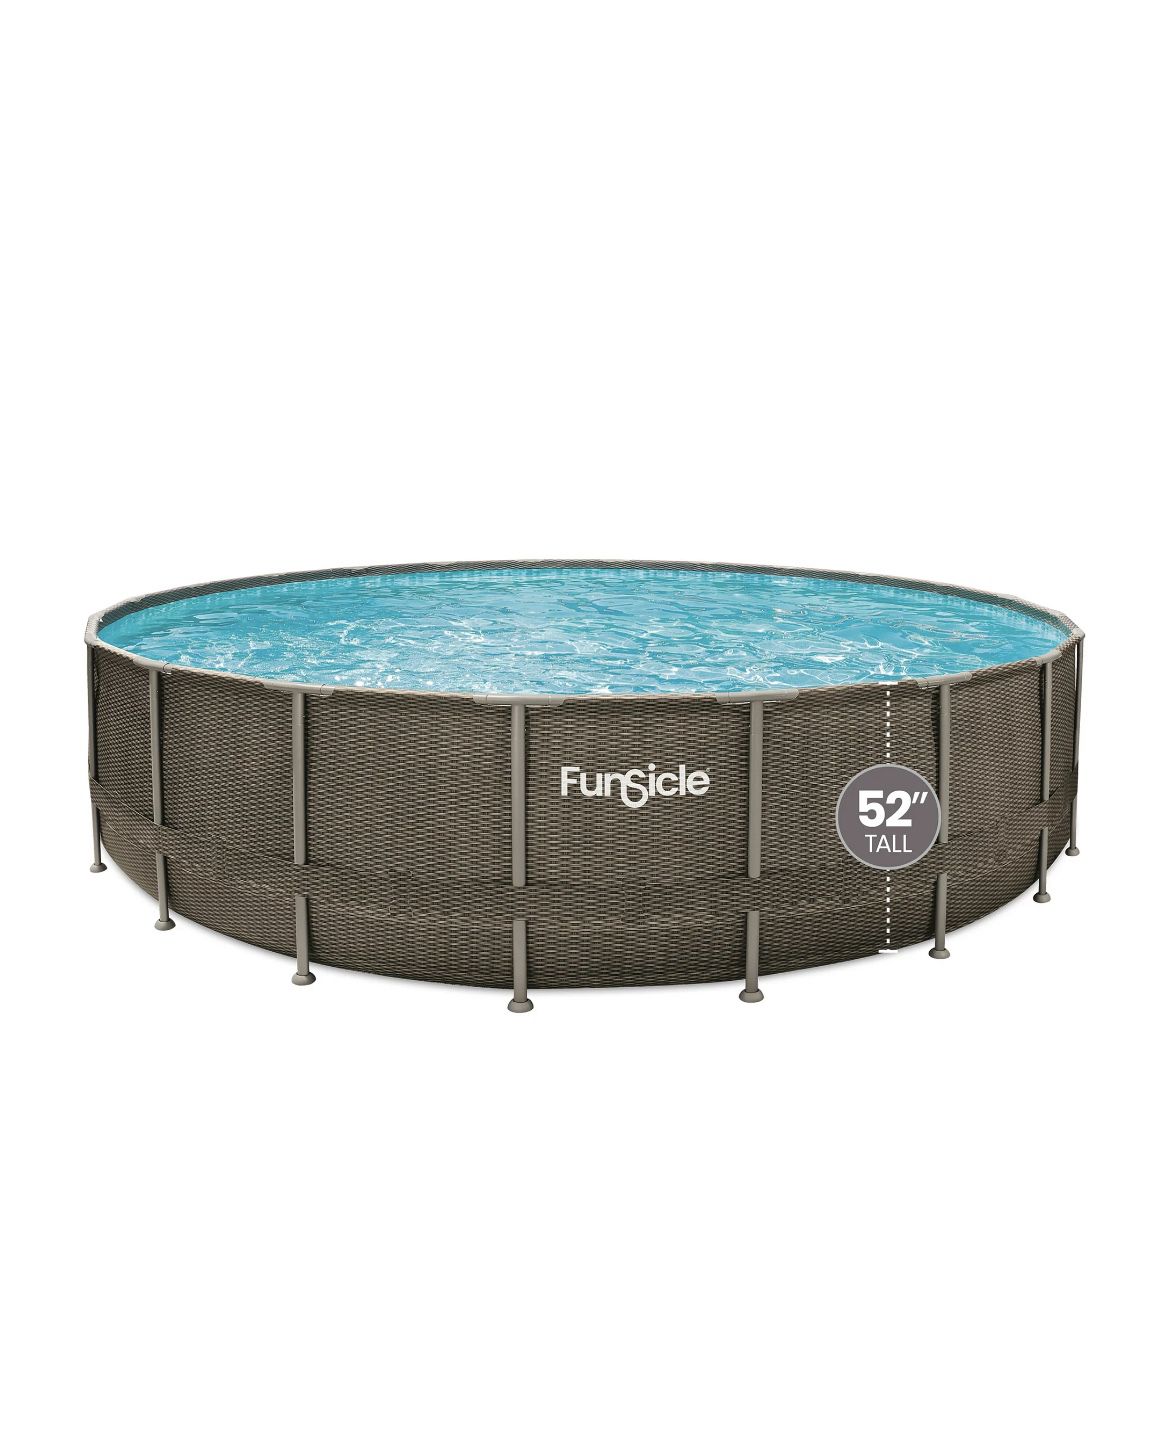 Funsicle 22 ft Oasis Designer Above Ground Frame Swimming Pool, Dark Double Rattan, Round, Age 6 & up